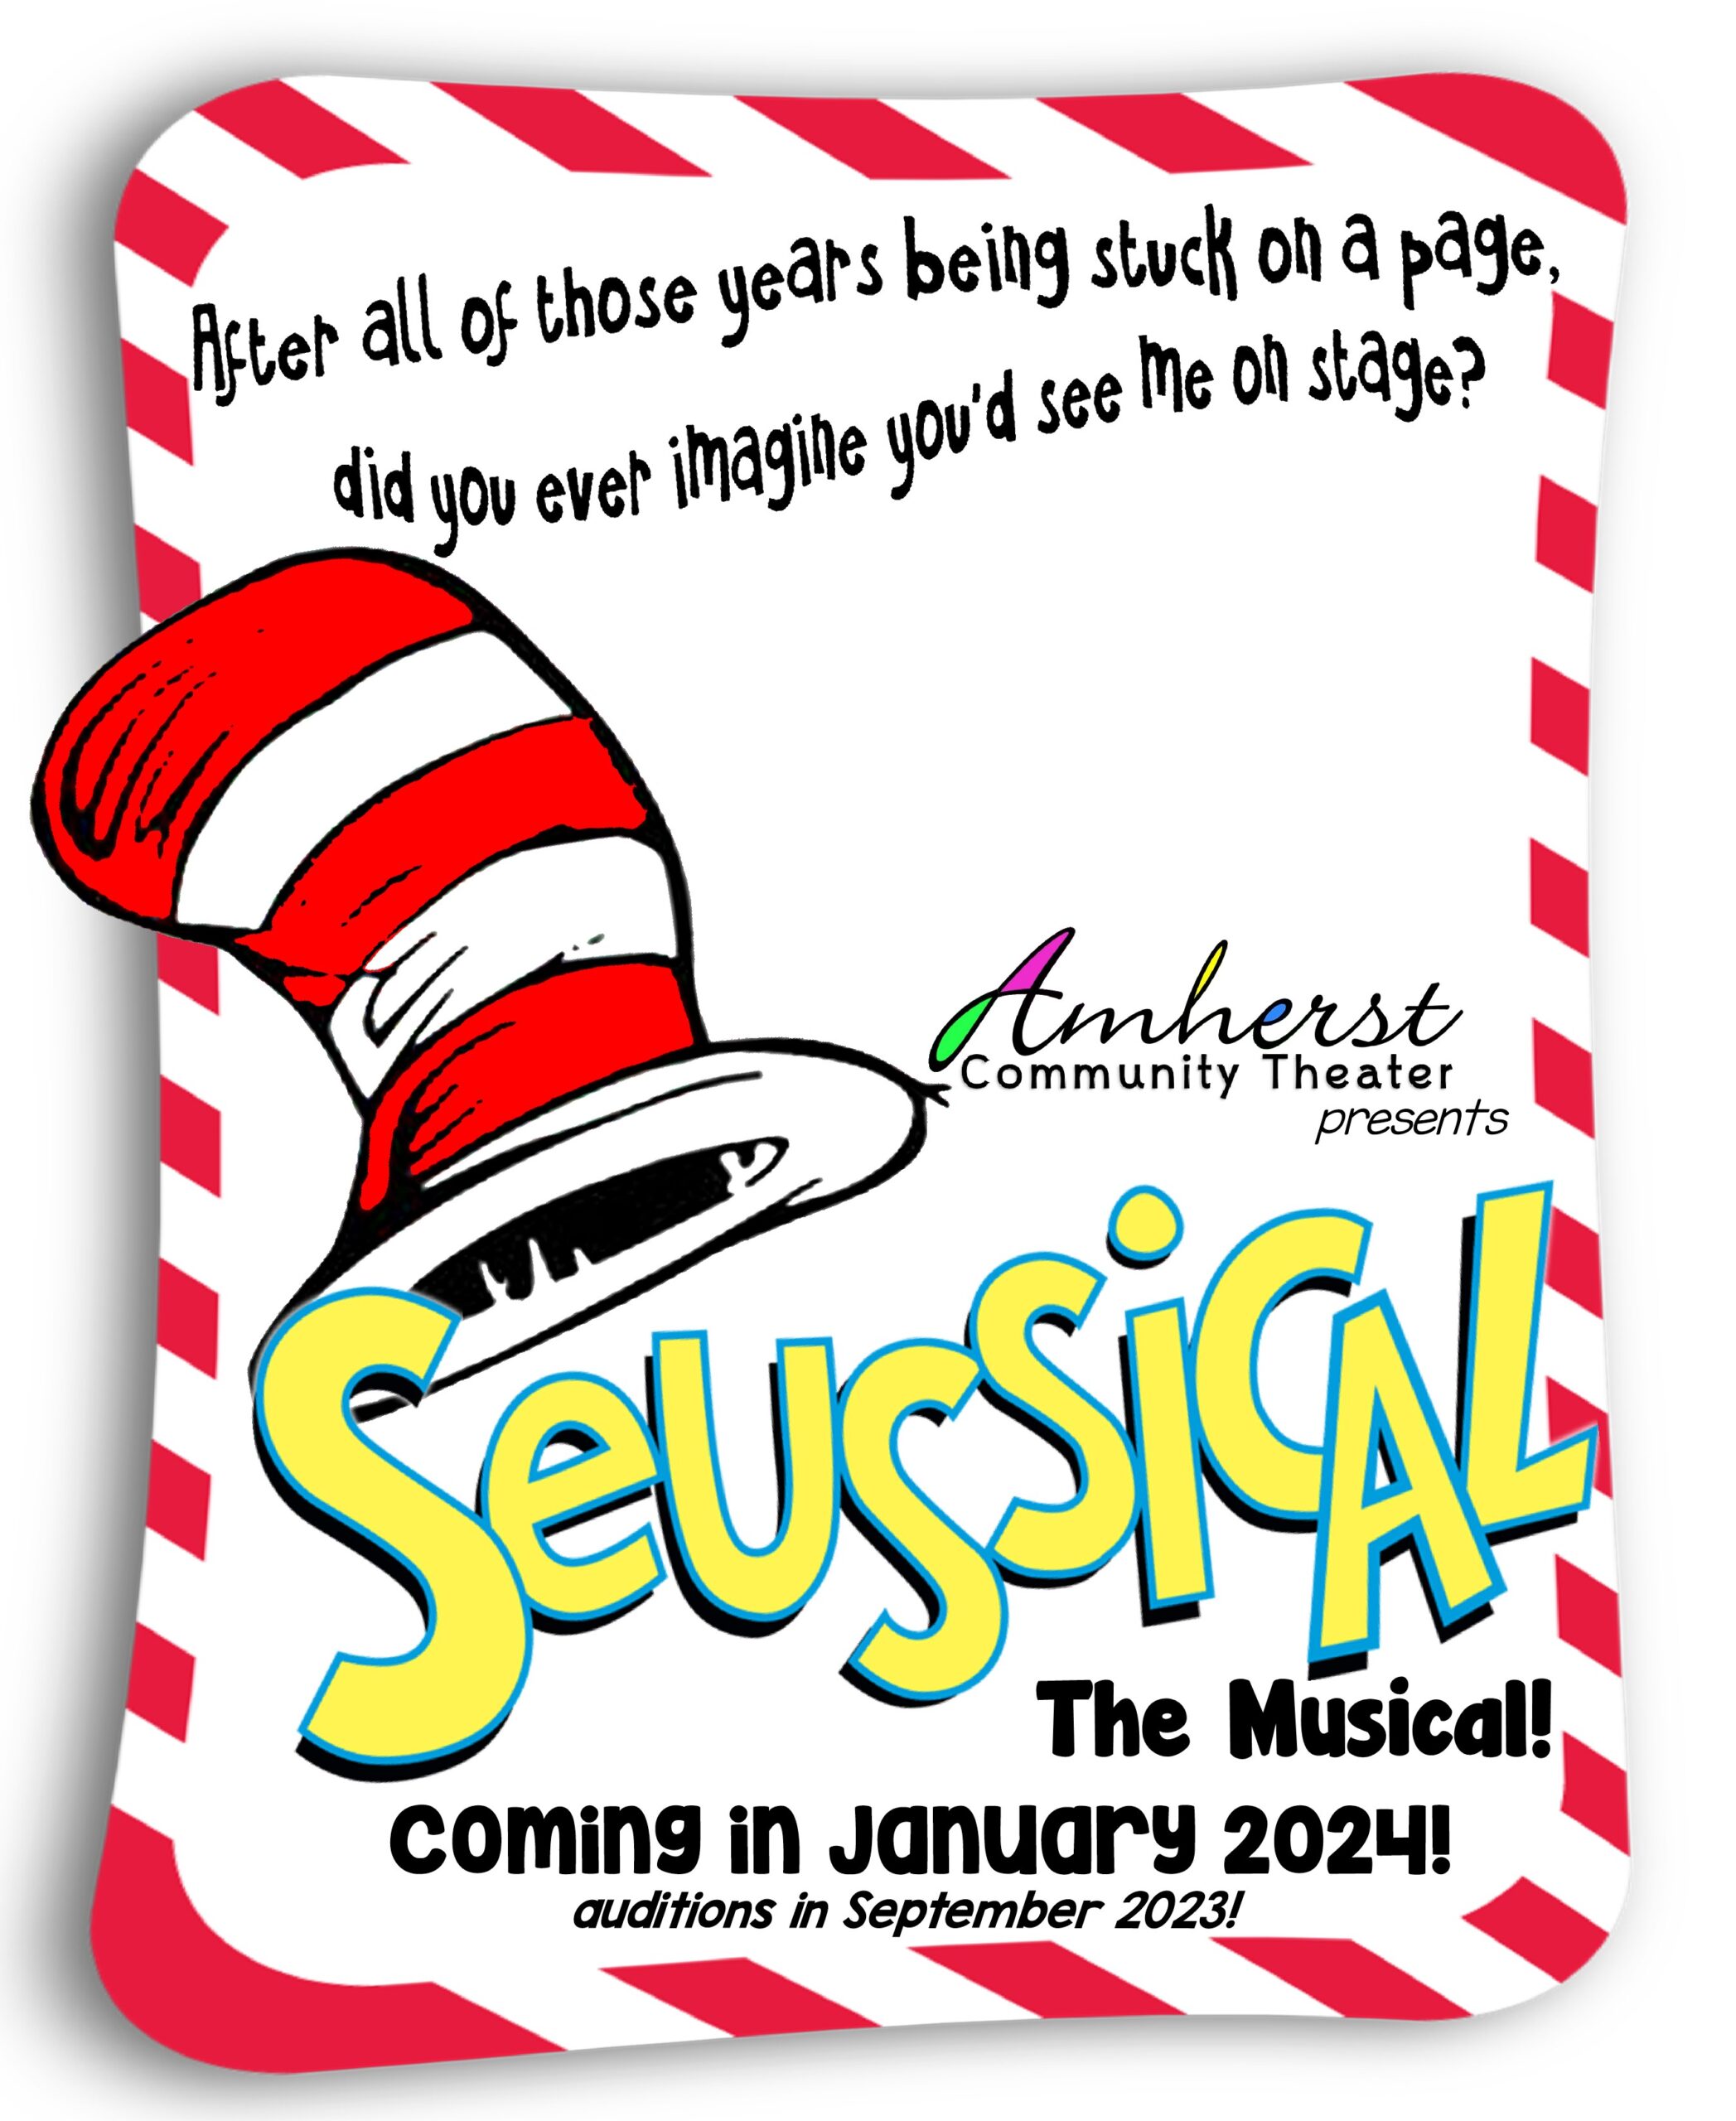 Announcing our next show: Seussical! Auditions in September 2023; show in January 2024!